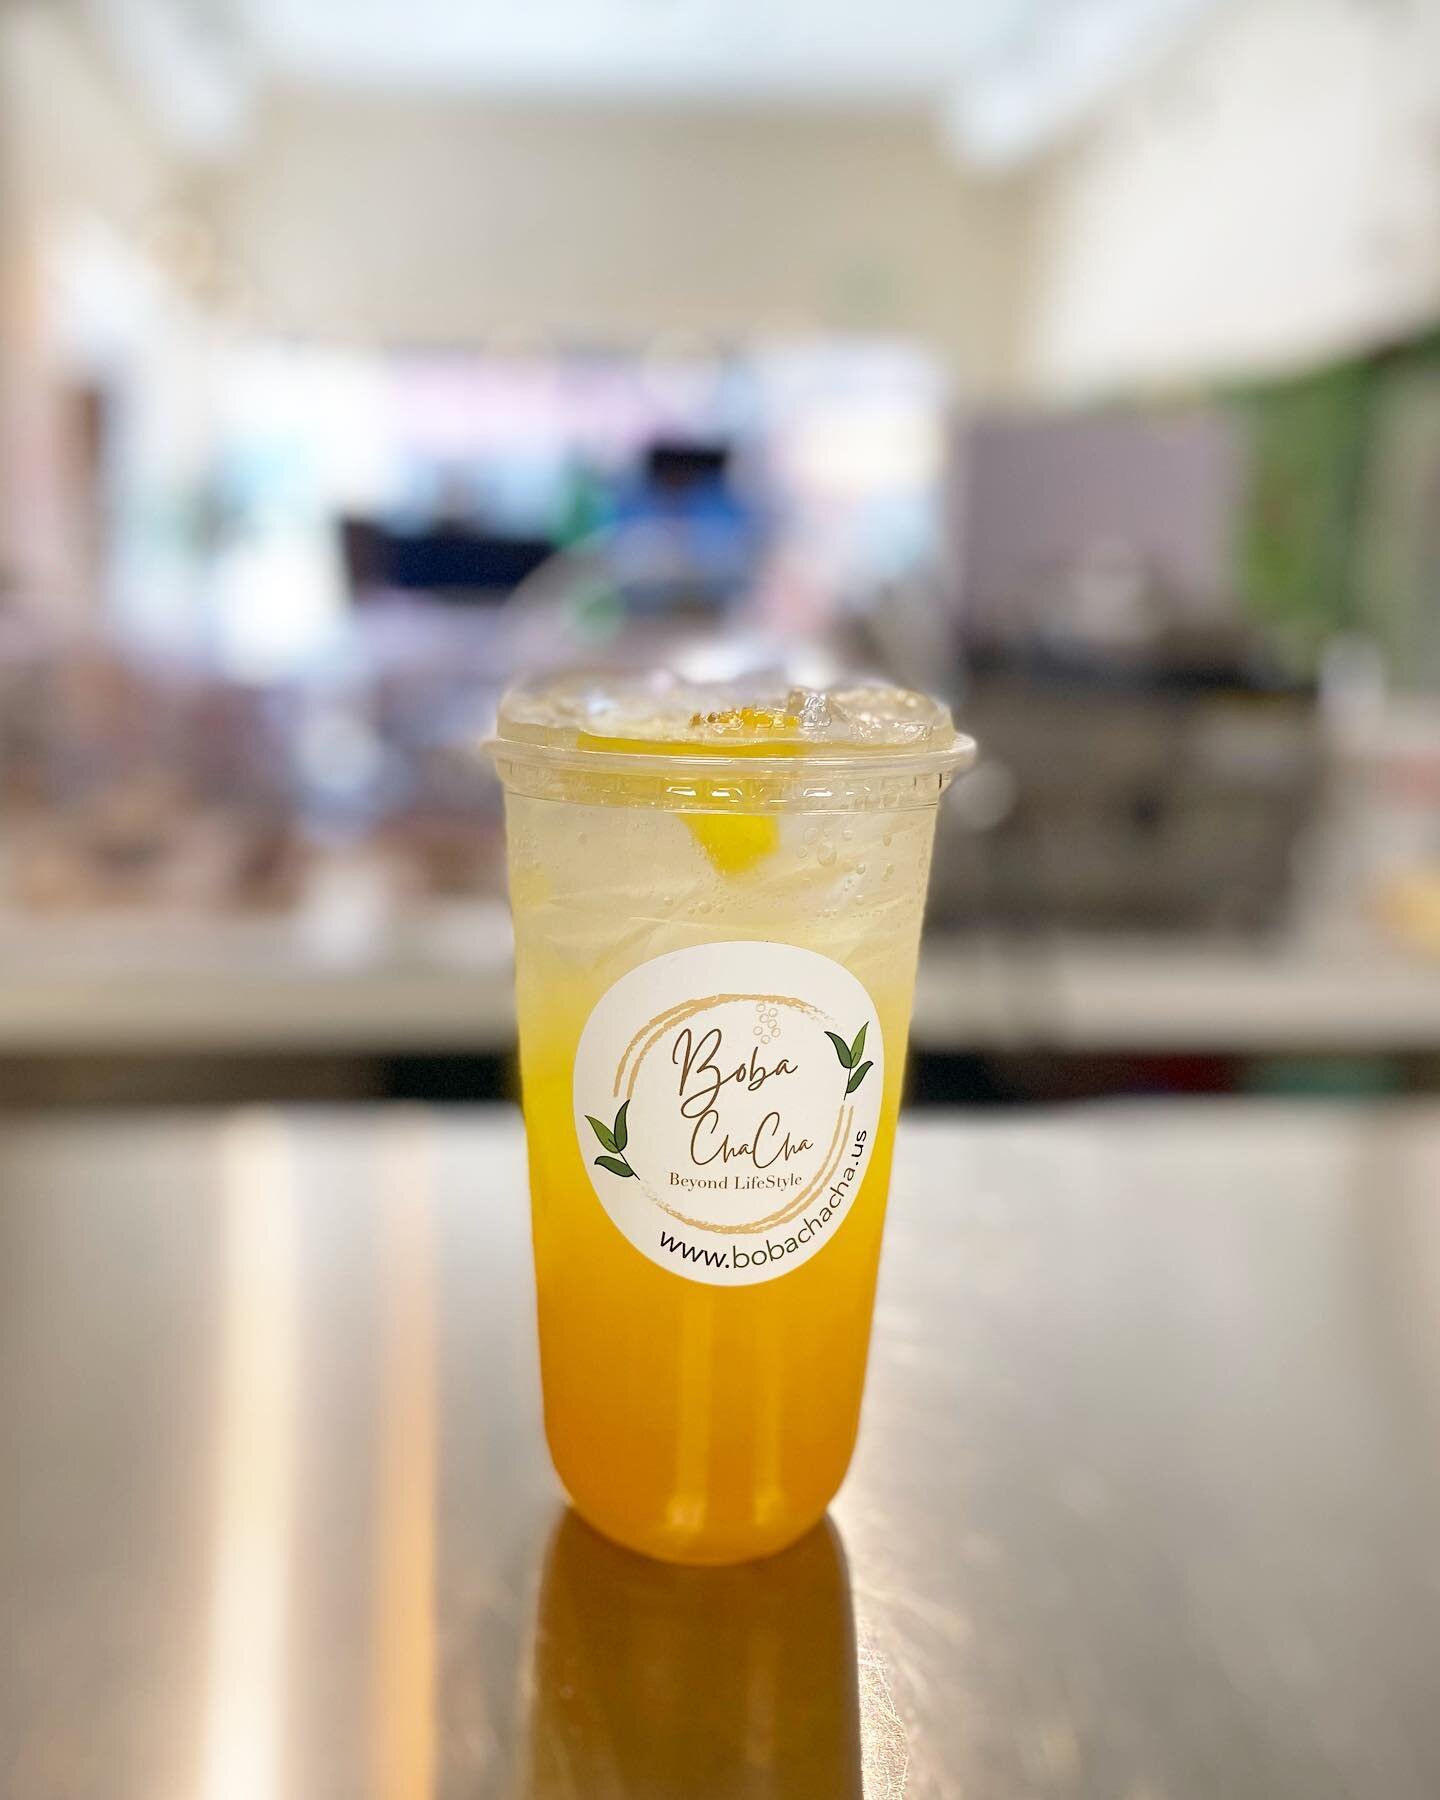 These last days of Summer are better spent with a mango ice tea in hand! 🥭🧋
We use fresh fruits, premium boba, and our slow brewed tea process to create the best drinks for you! Stop by today and pick one up 🥭🥭🥭

.
.
.
.

#boba #bubbletea #bobat